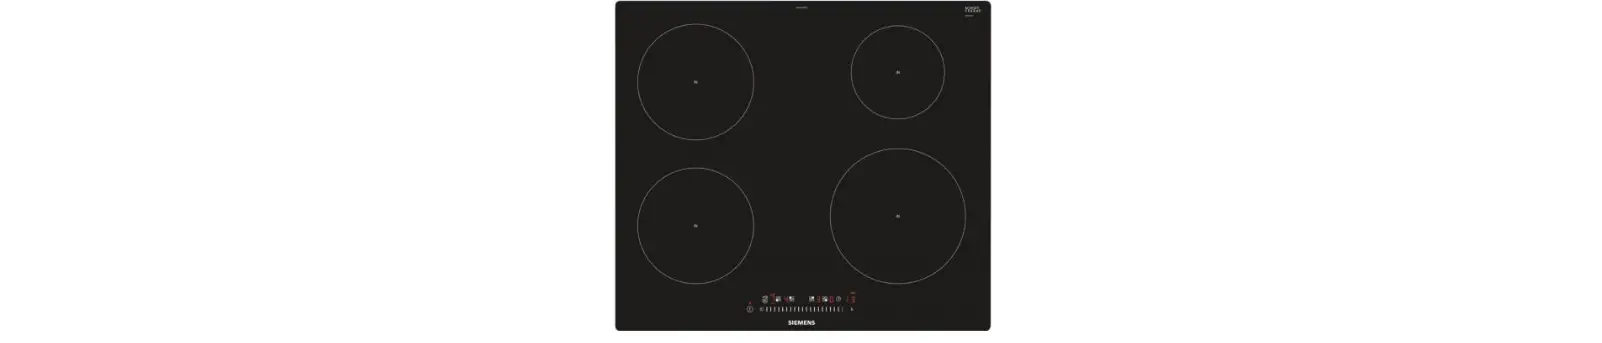 EH601 self-sufficient 60 cm induction hob